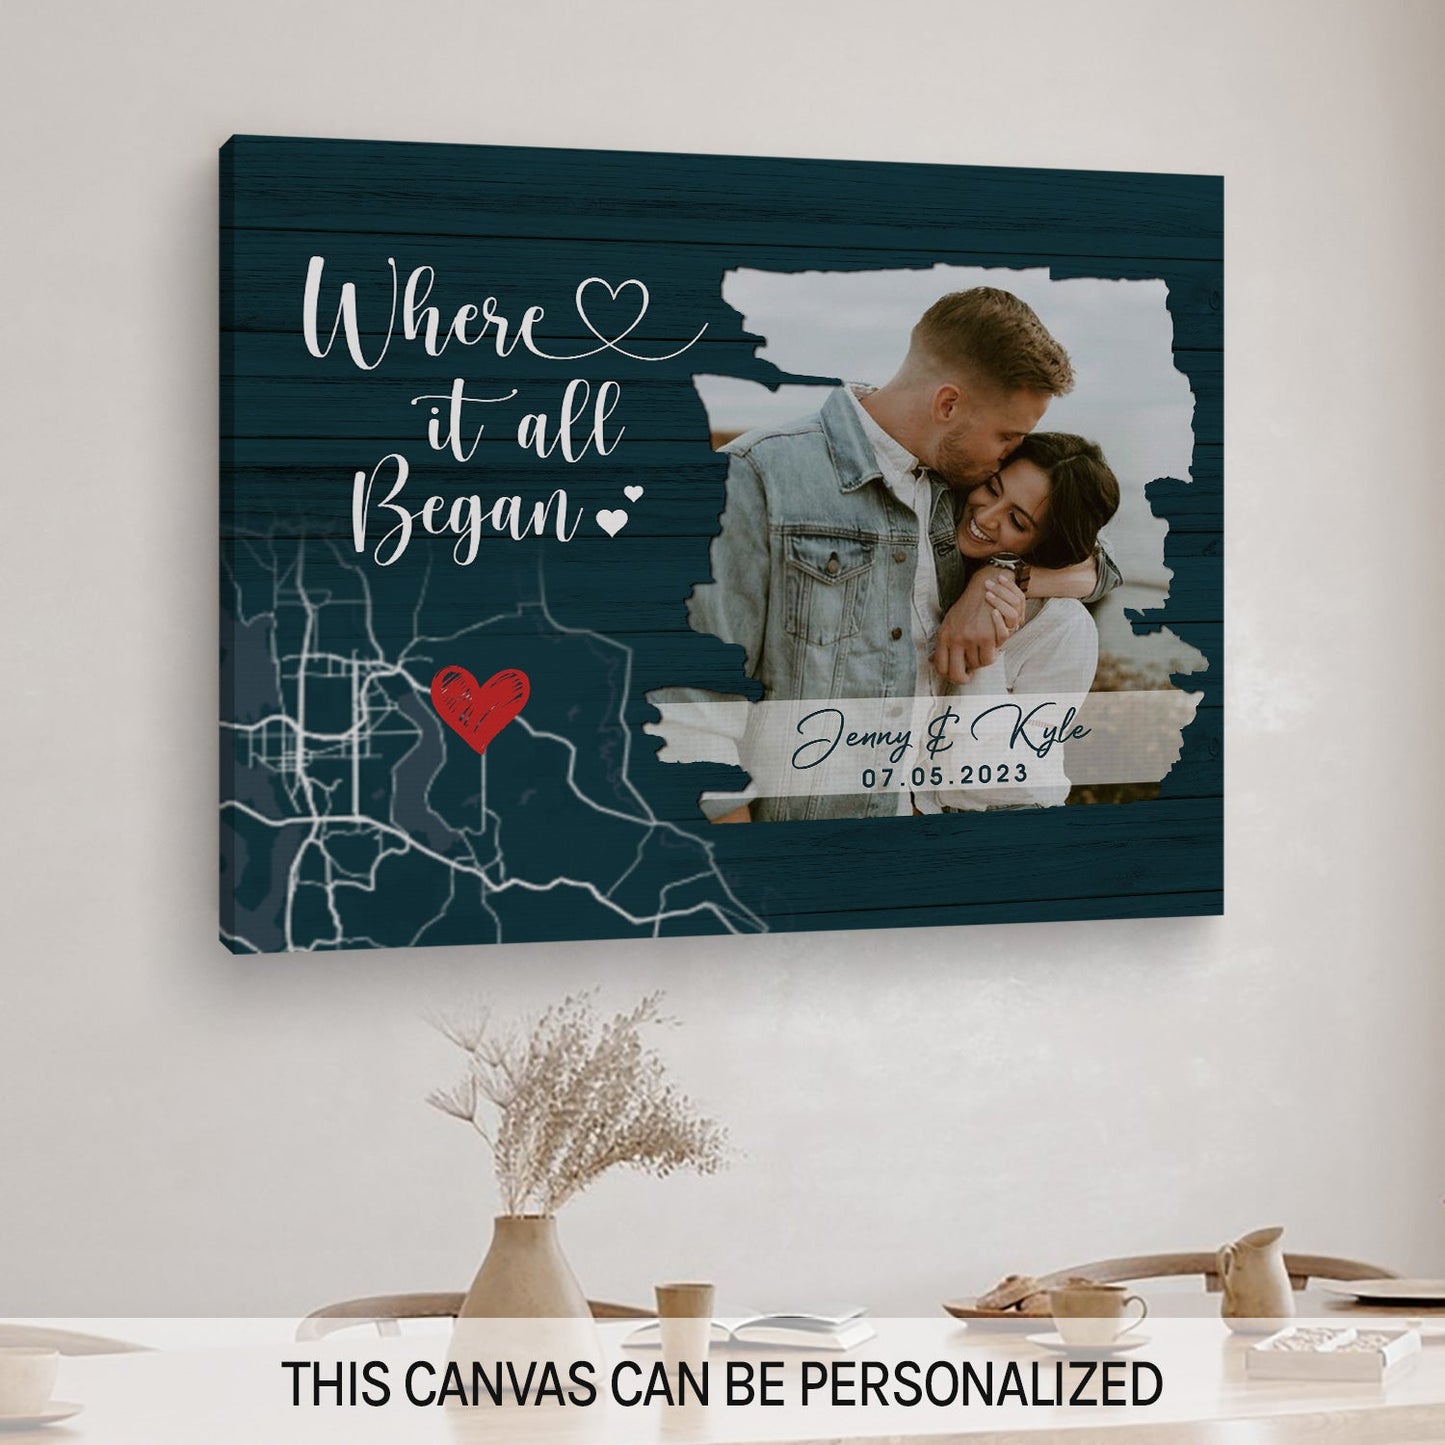 Where It All Began Map - Personalized Anniversary or Valentine's Day gift for Husband or Wife - Custom Canvas Print - MyMindfulGifts